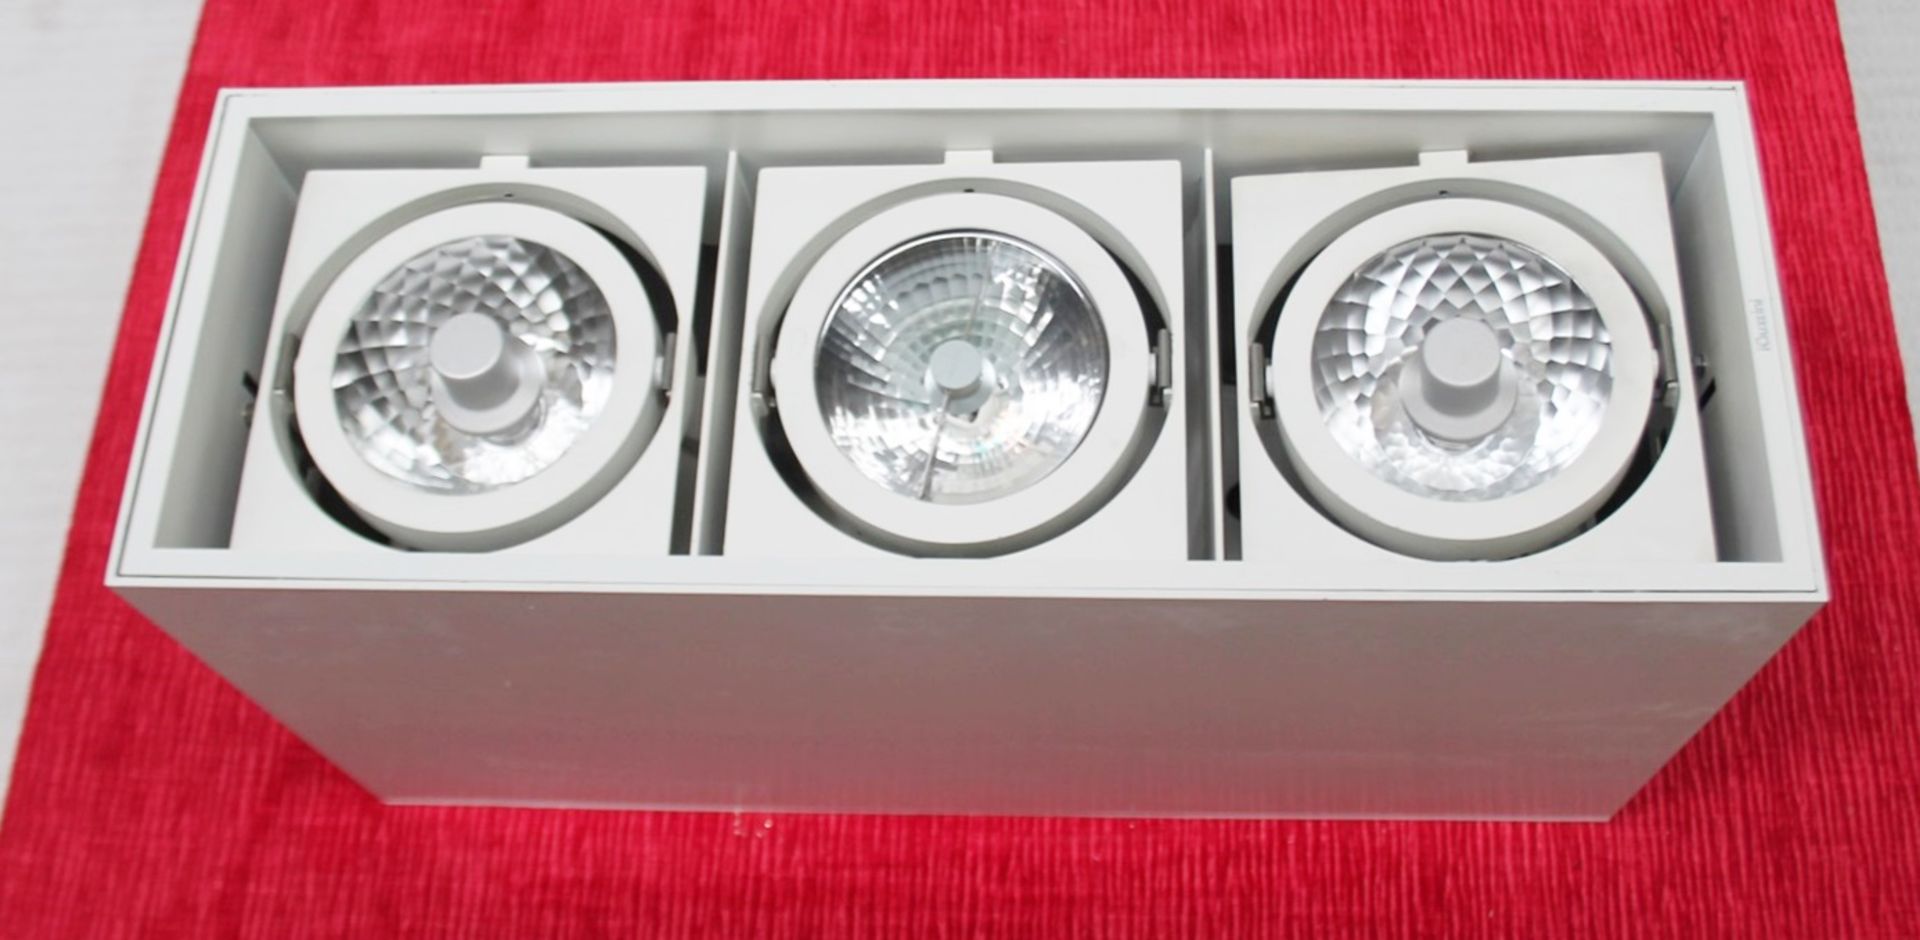 2 x IGUZZINI Commercial Triple Directional Gimble Spot Light Fittings In Metal Casings - Recently - Image 4 of 6